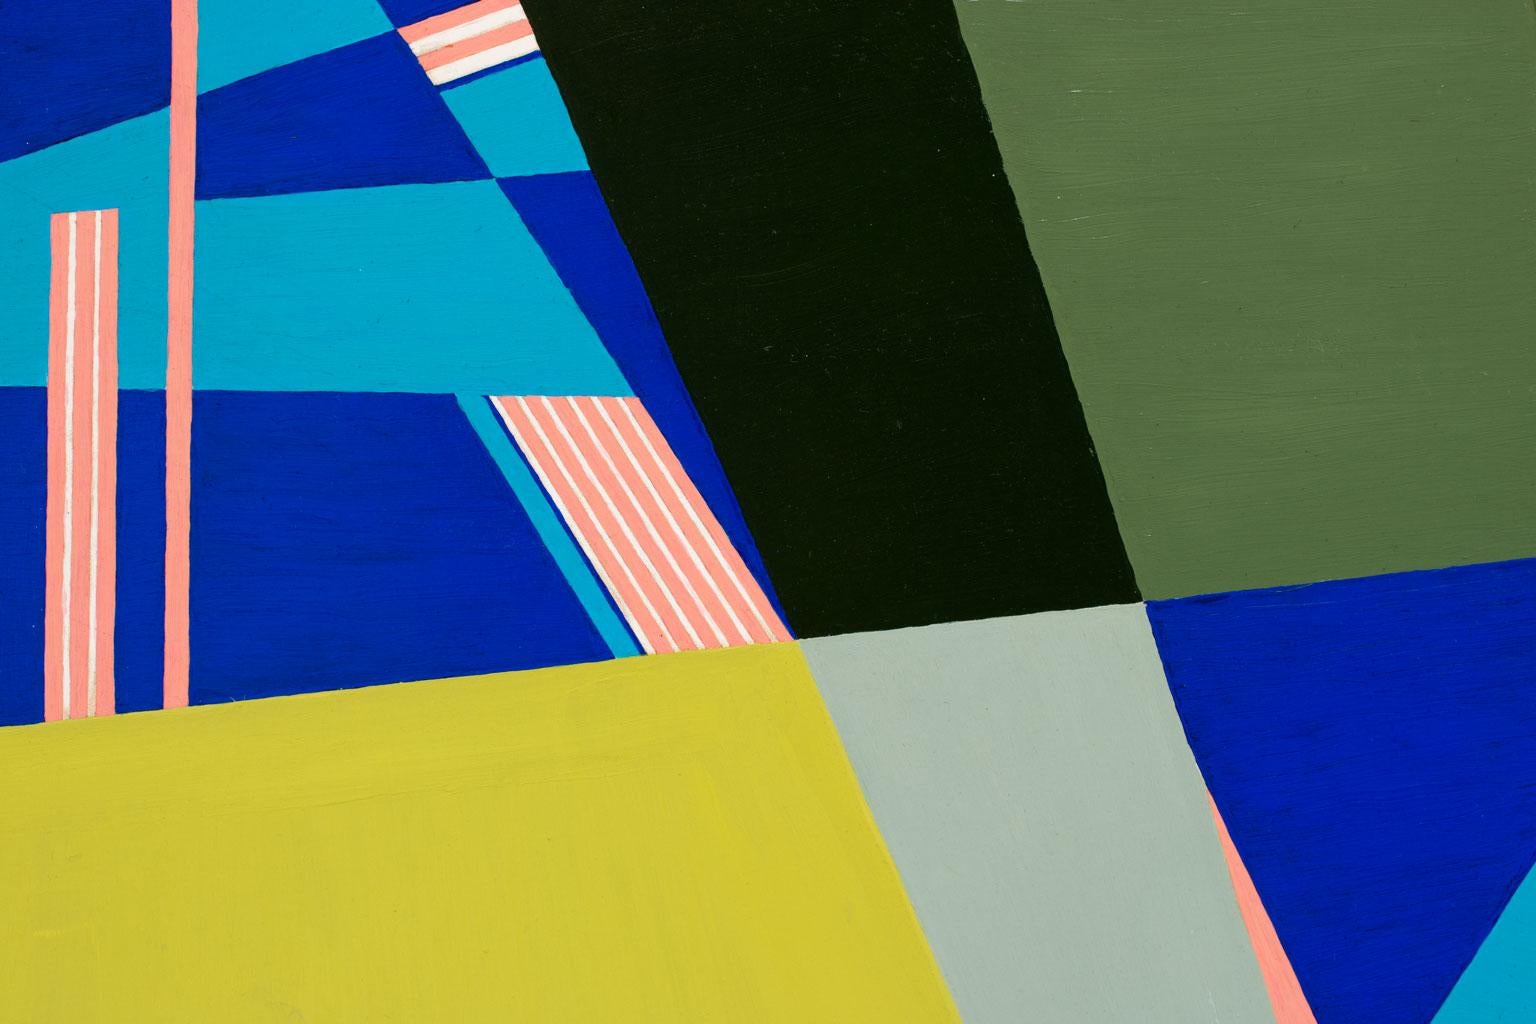 Untitled Geometric Abstraction, an original oil on masonite by Juliette Steele, is a piece for the true collector. Steele's use of color and patterns immediately captivates the viewer, reminding us of works by other pioneer abstractionists, such as